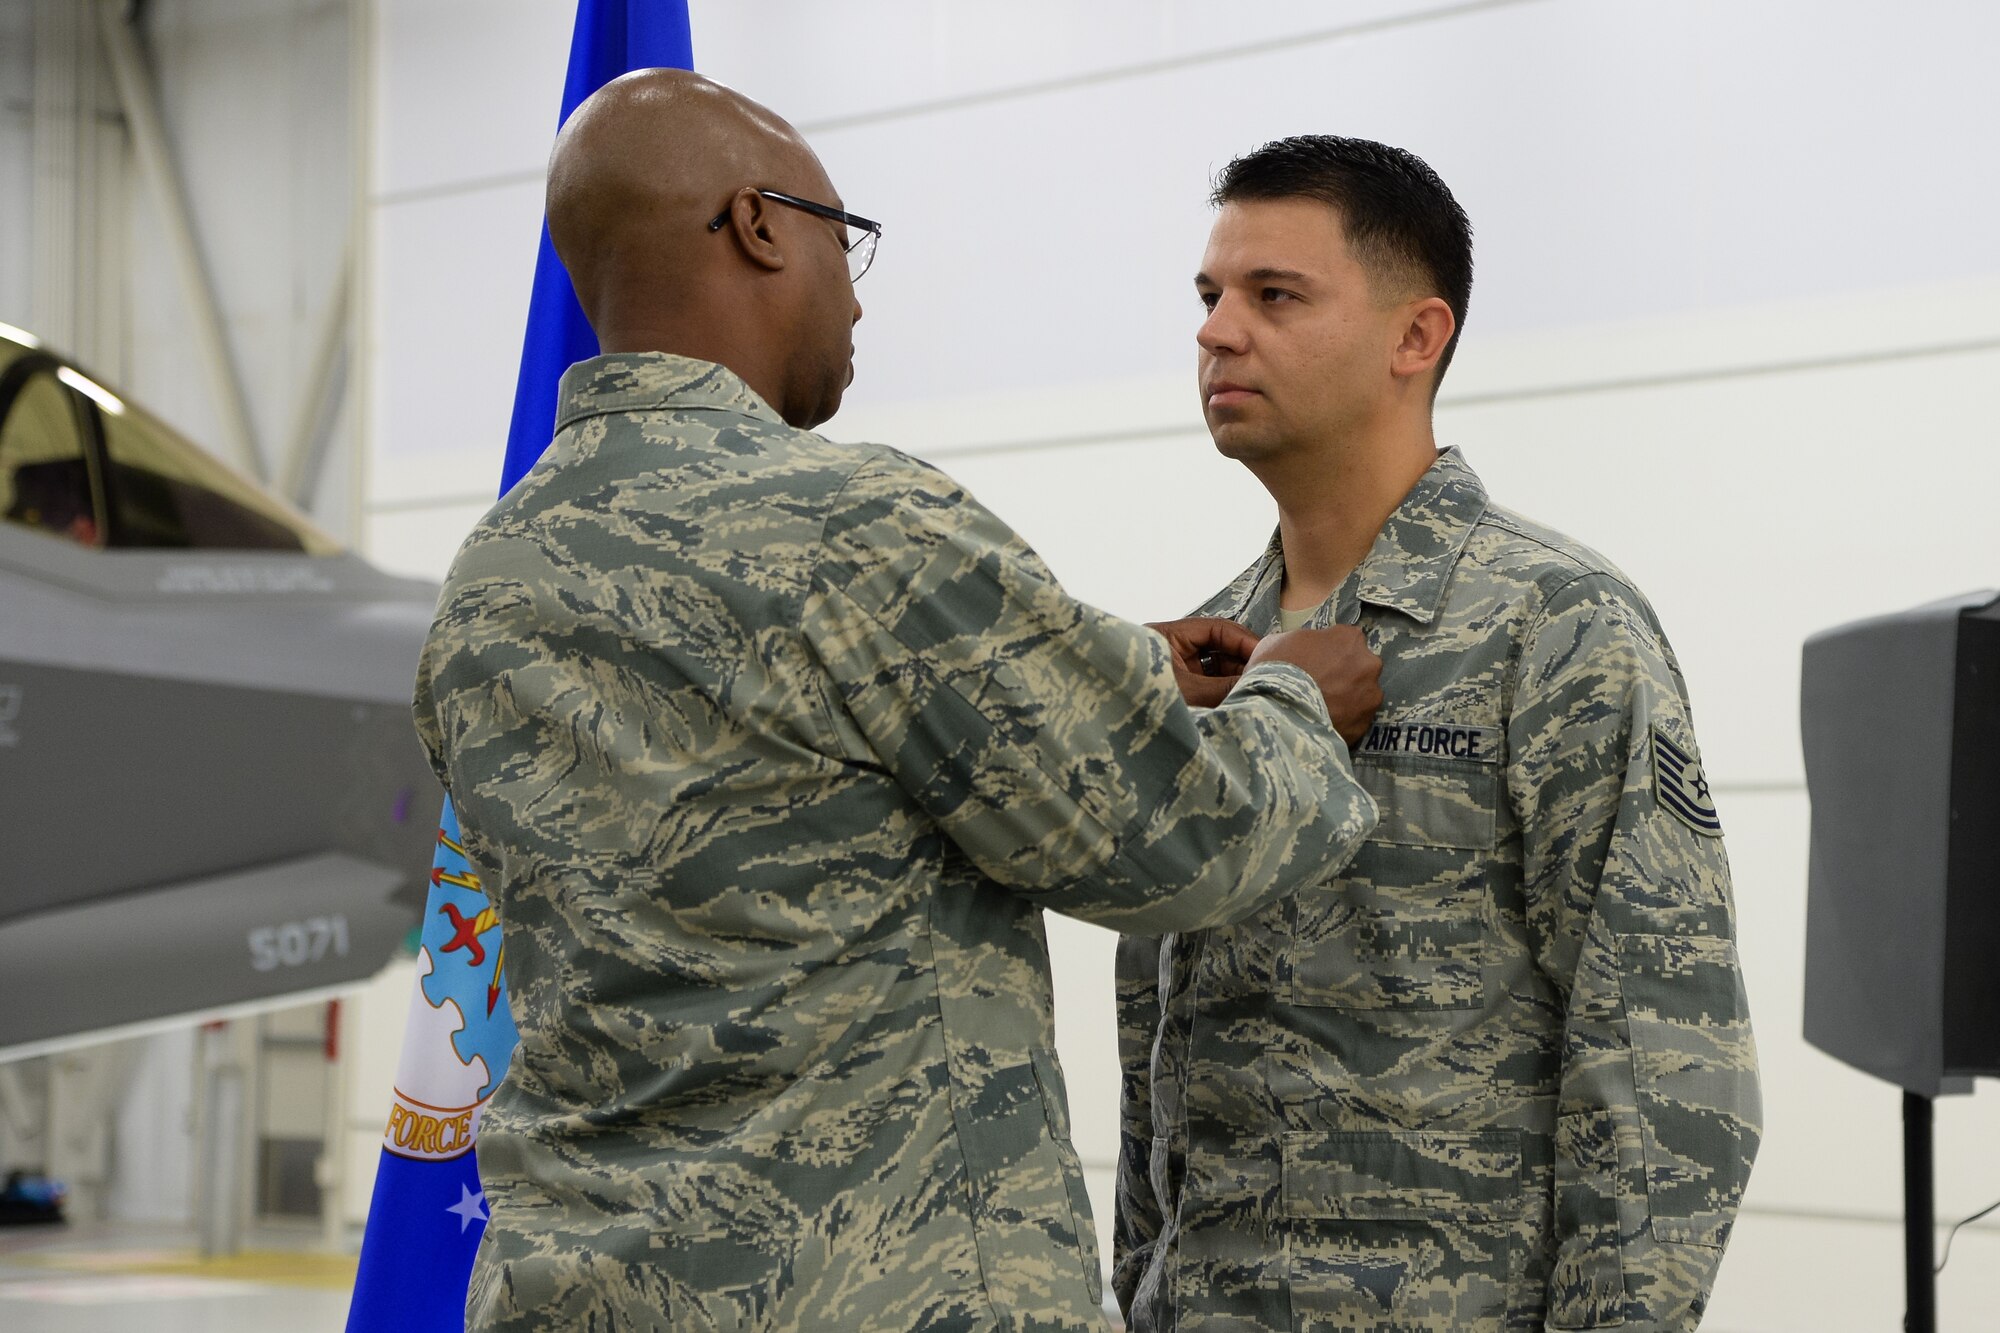 Electronic Warfare Specialist Tech. Sgt. Jesus Soto receives a Purple Heart from 388th Component Maintenance Sqaudron Commander Lt. Col. Steven Oliver at Hill Air Force Base, Utah, Oct. 30, 2015. Soto was injured in 2005 while deployed with the 1st Security Forces Squadron to Forward Operating Base Speicher near Tikrit, Iraq. While there, he provided security to U.S. convoys and foreign national supply trucks. (U.S. Air Force photo by R. Nial Bradshaw/Released)